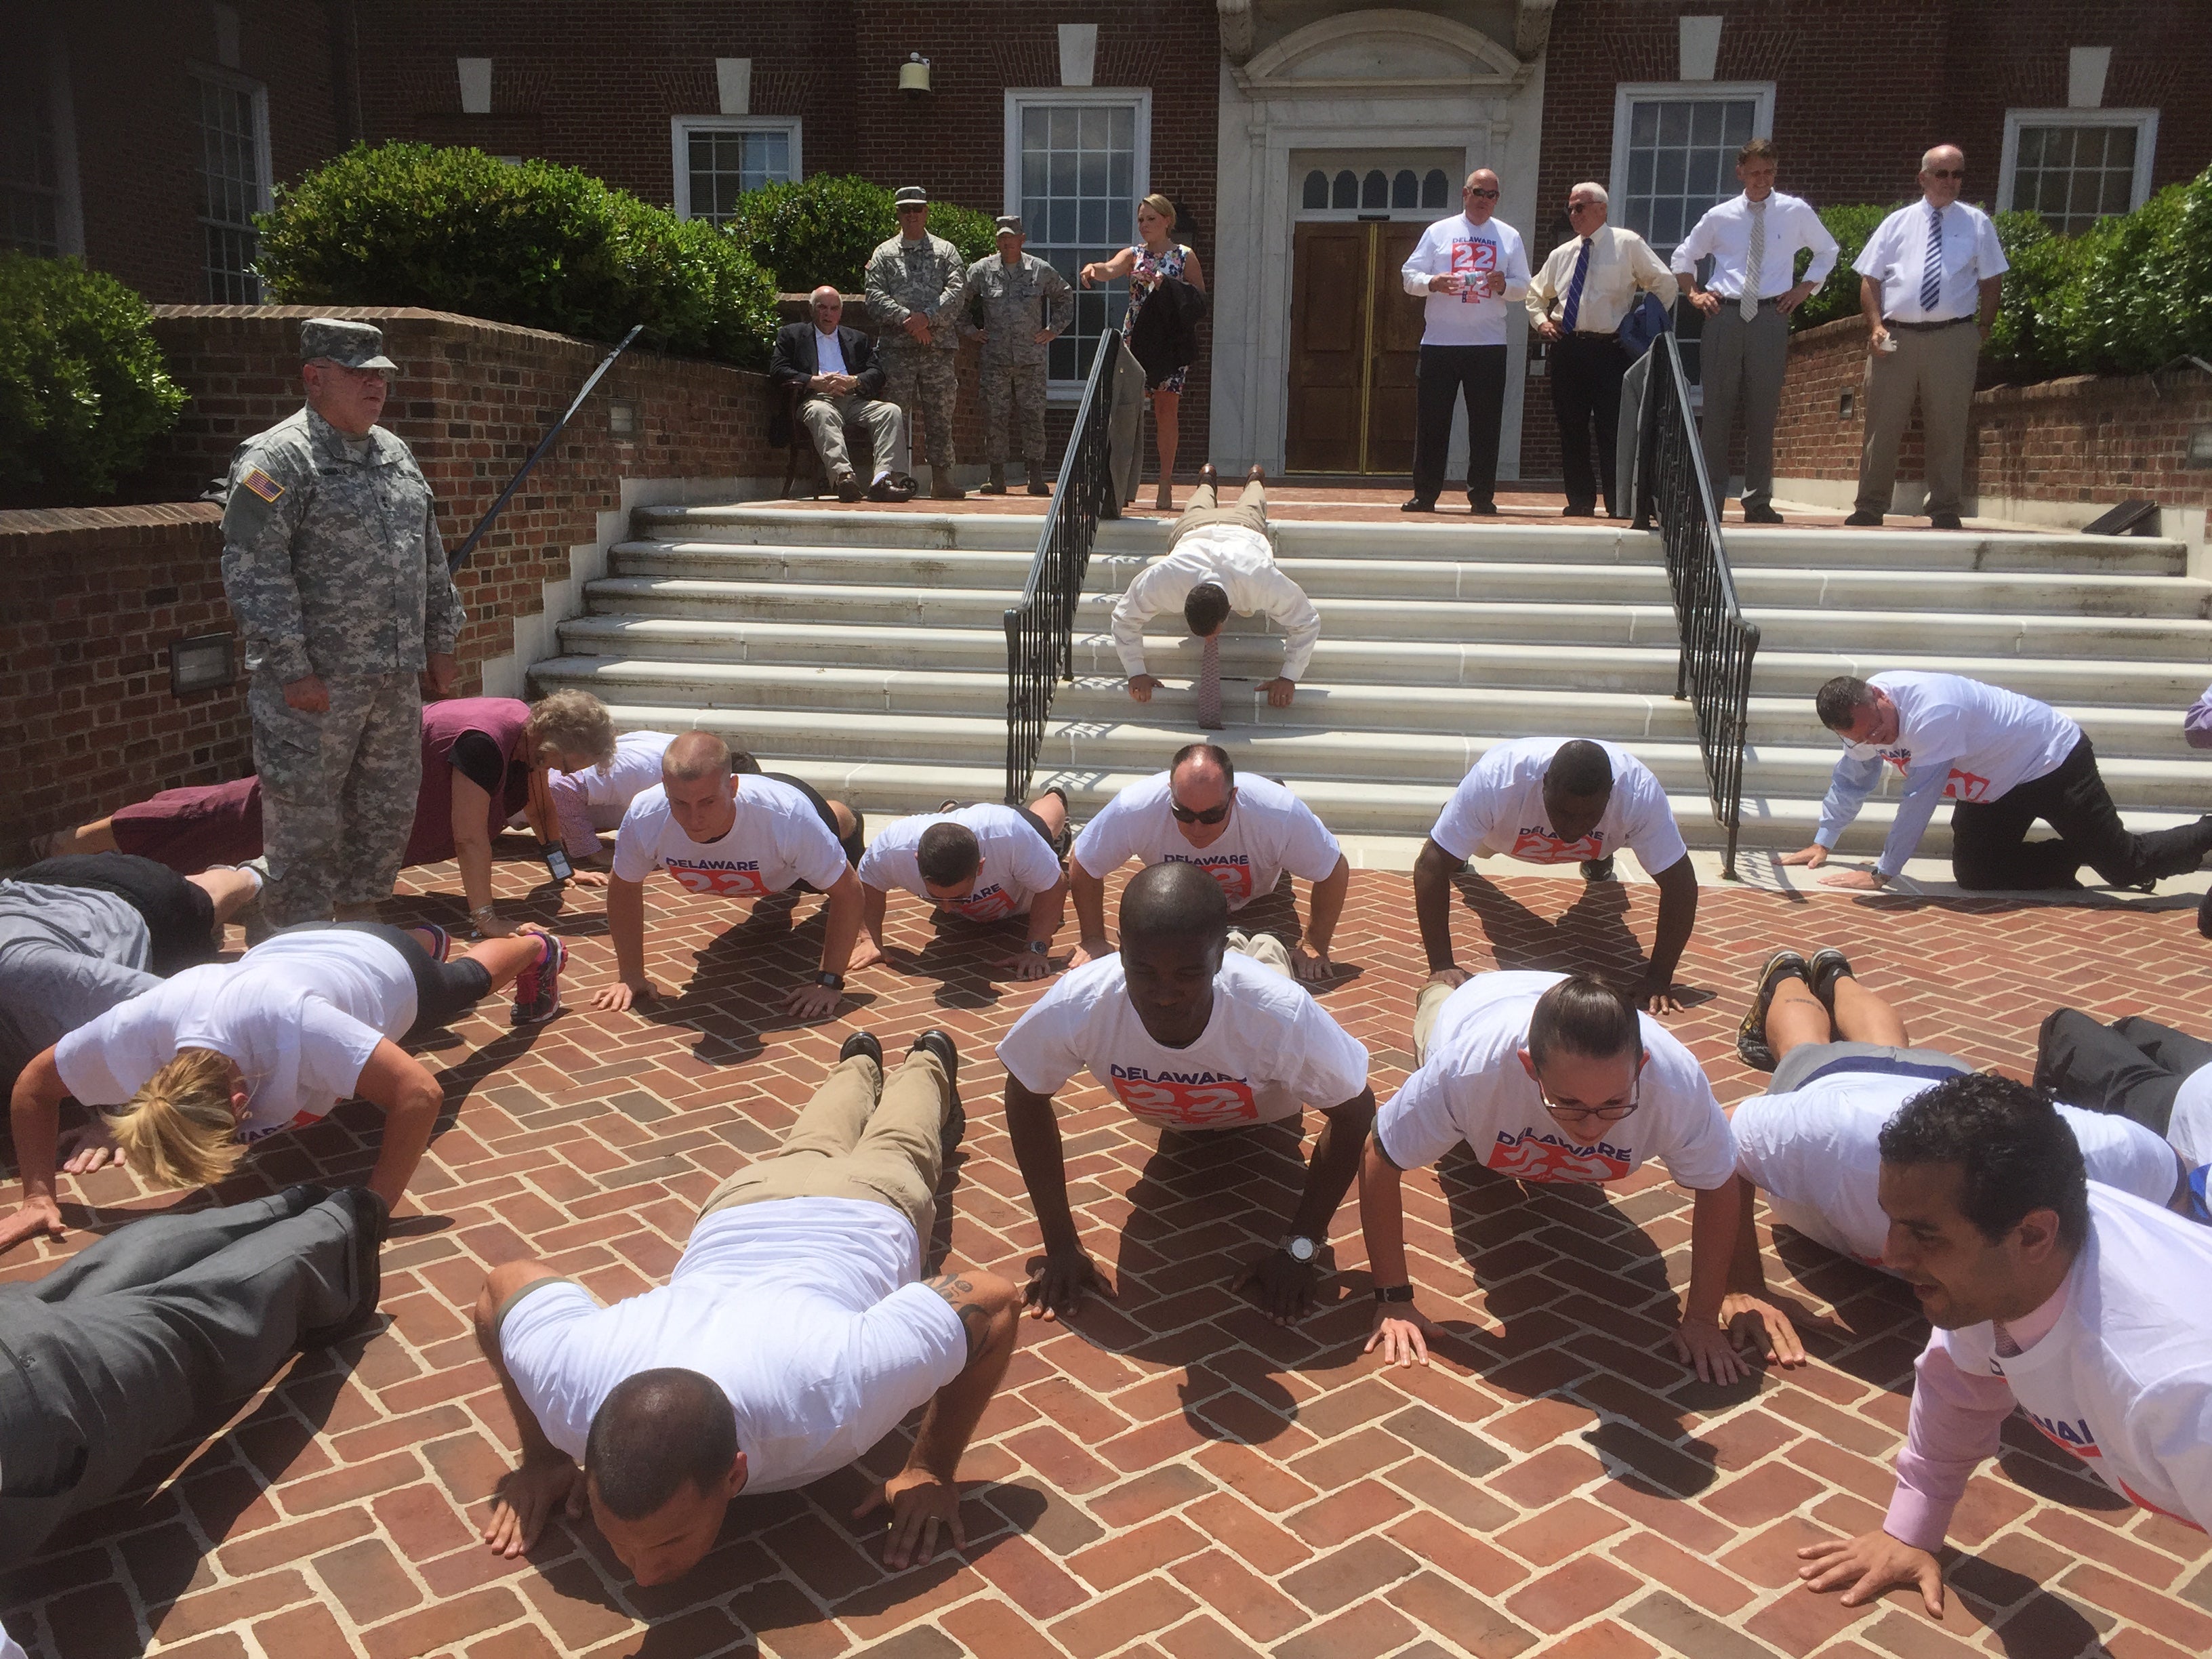 (Newsworks/Zoe Read) The Delaware General Assembly did 22 pushups to raise awareness for veteran suicide.